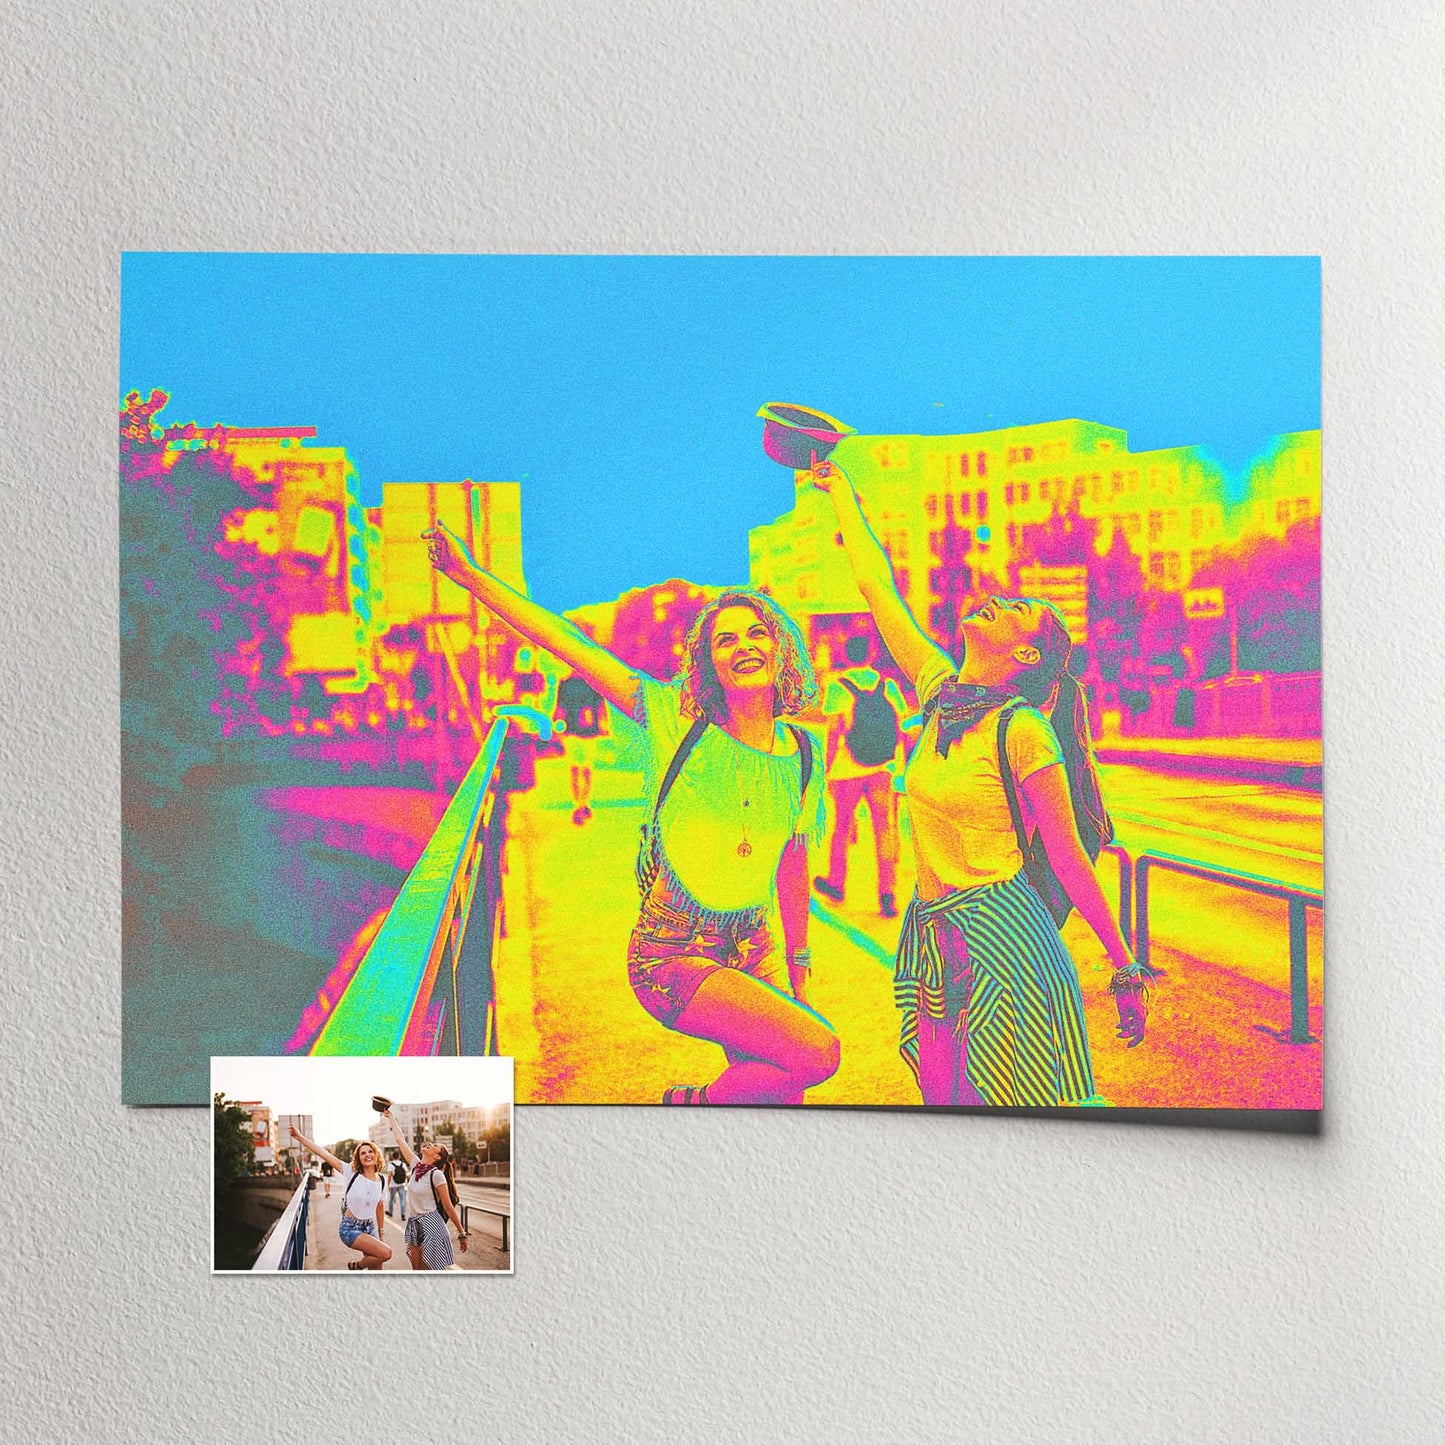 Brighten up your space with our Personalised Acid Trip Print. Printed from your photo, it showcases a neon color effect with striking yellow, green, pink, and blue hues. Its cool and vibrant presence adds a burst of energy and creativity